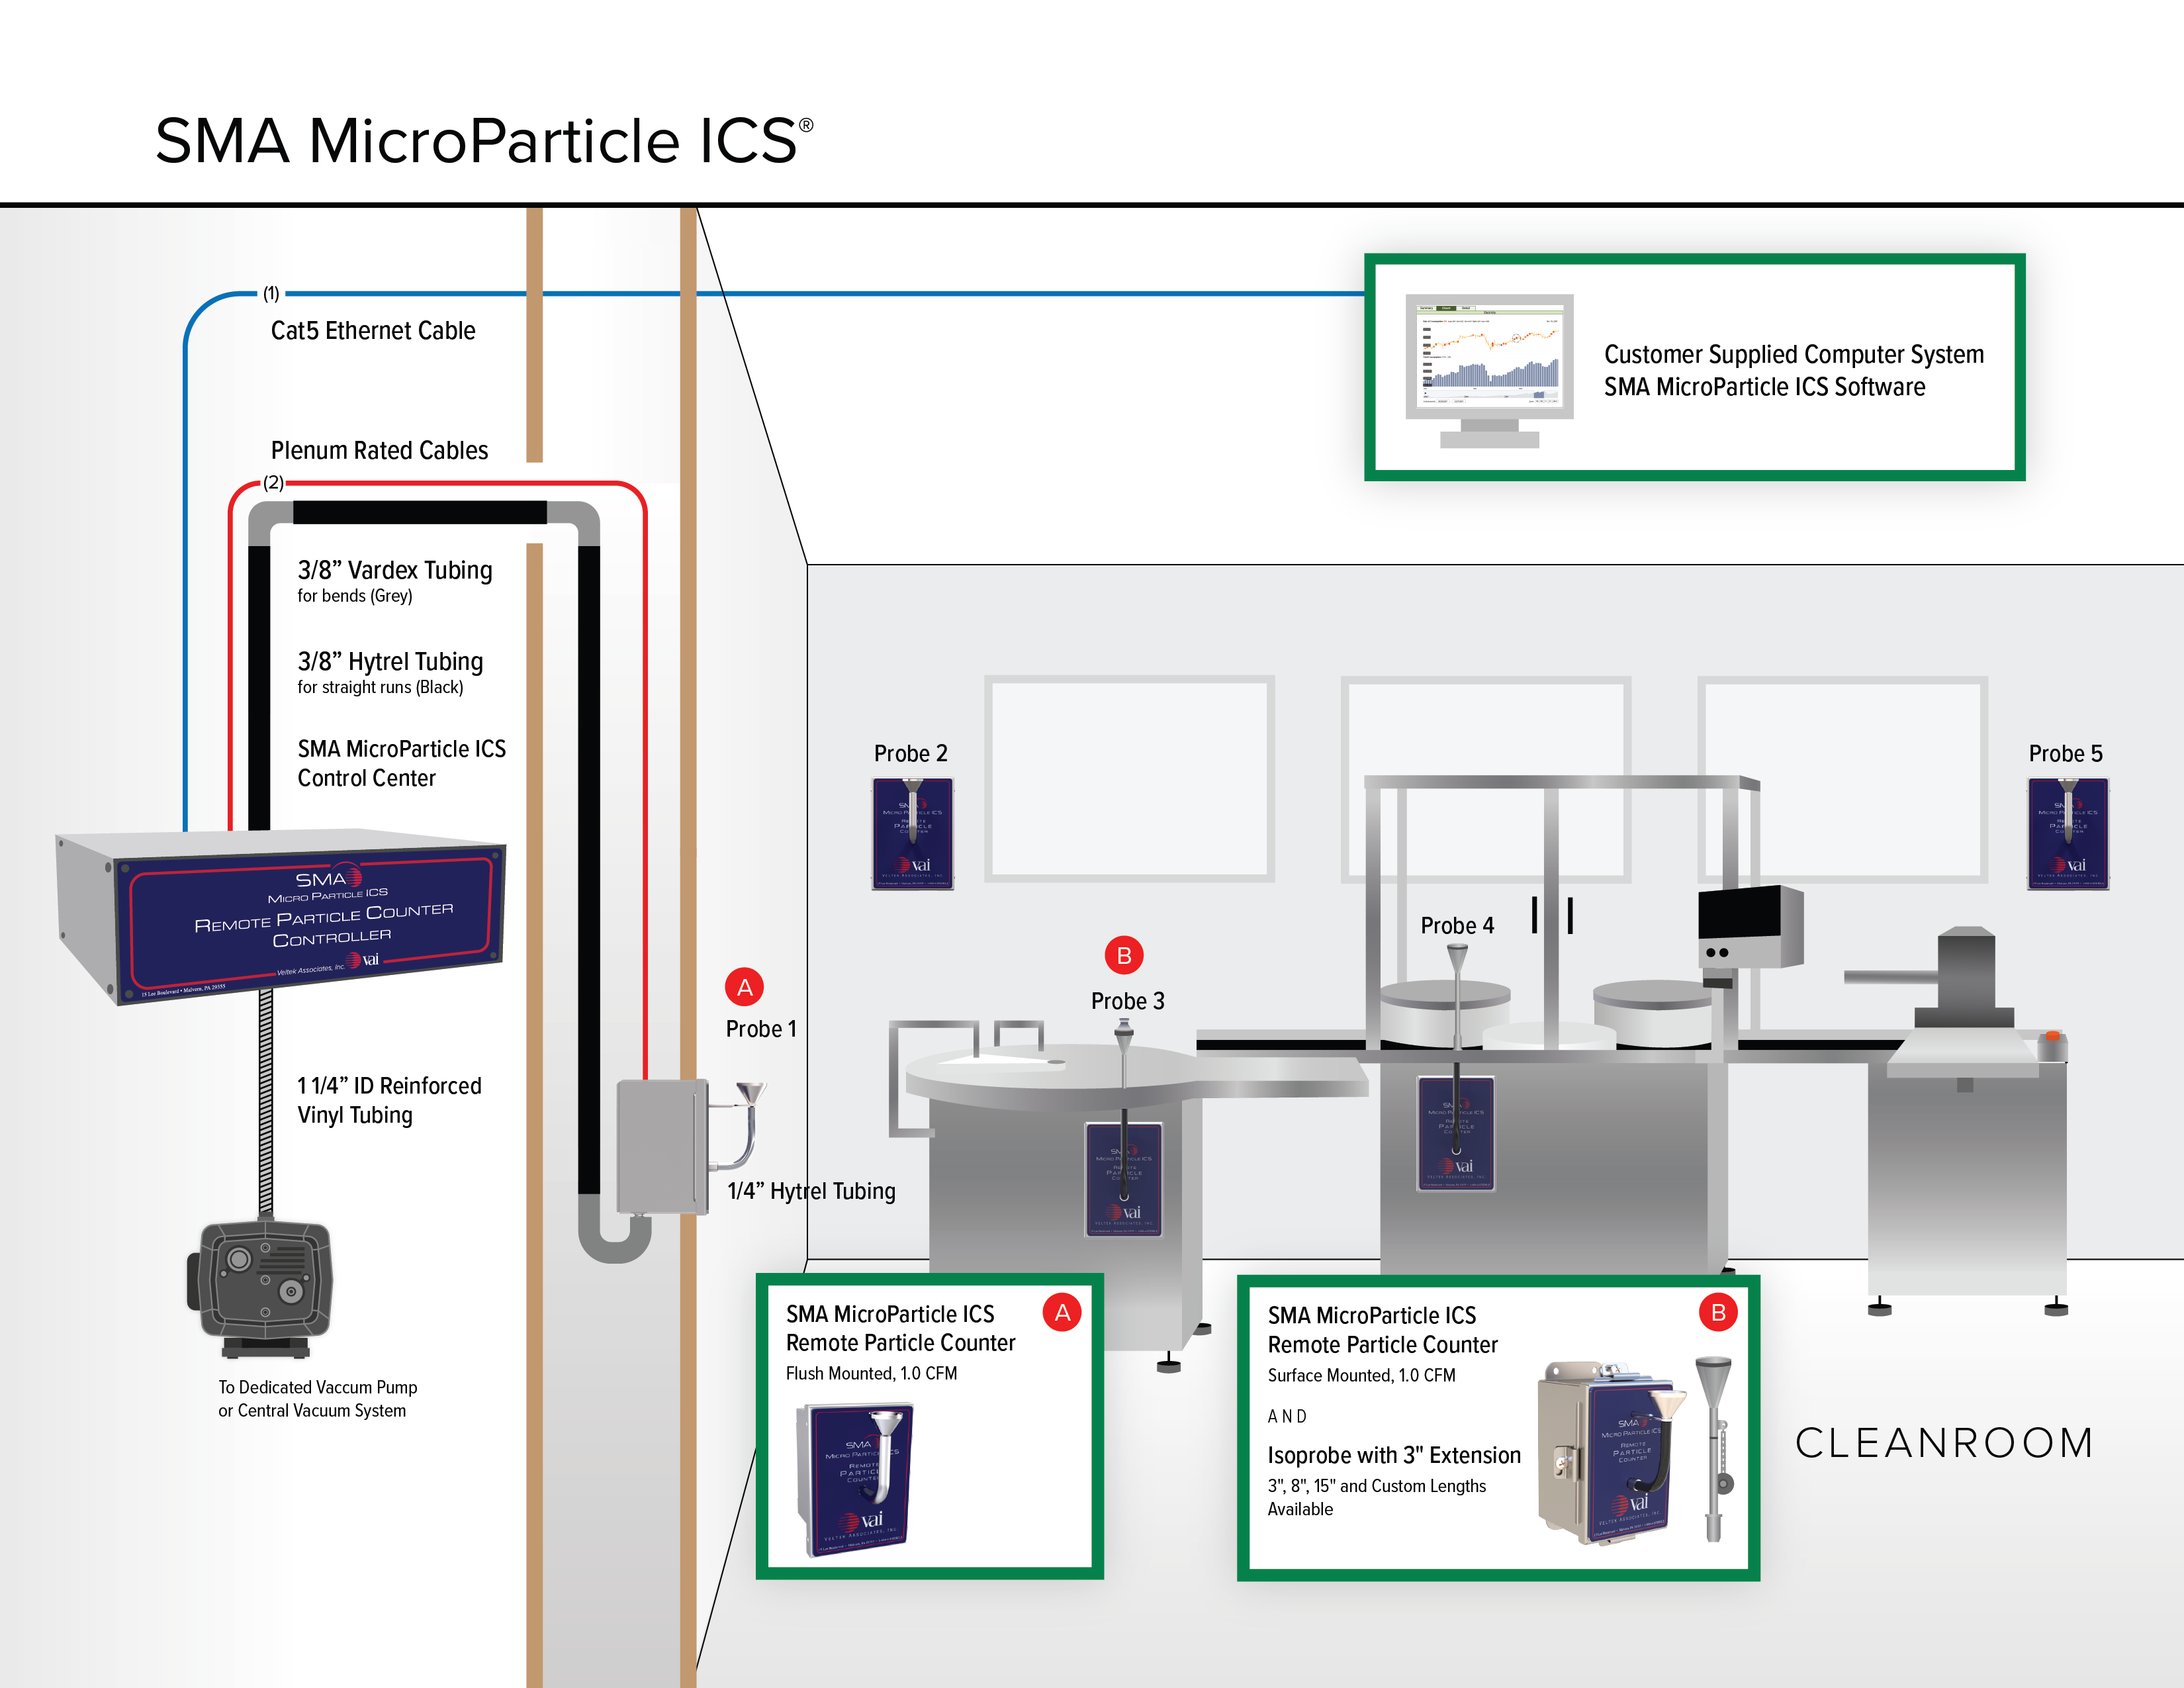 SMA MicroParticle ICS